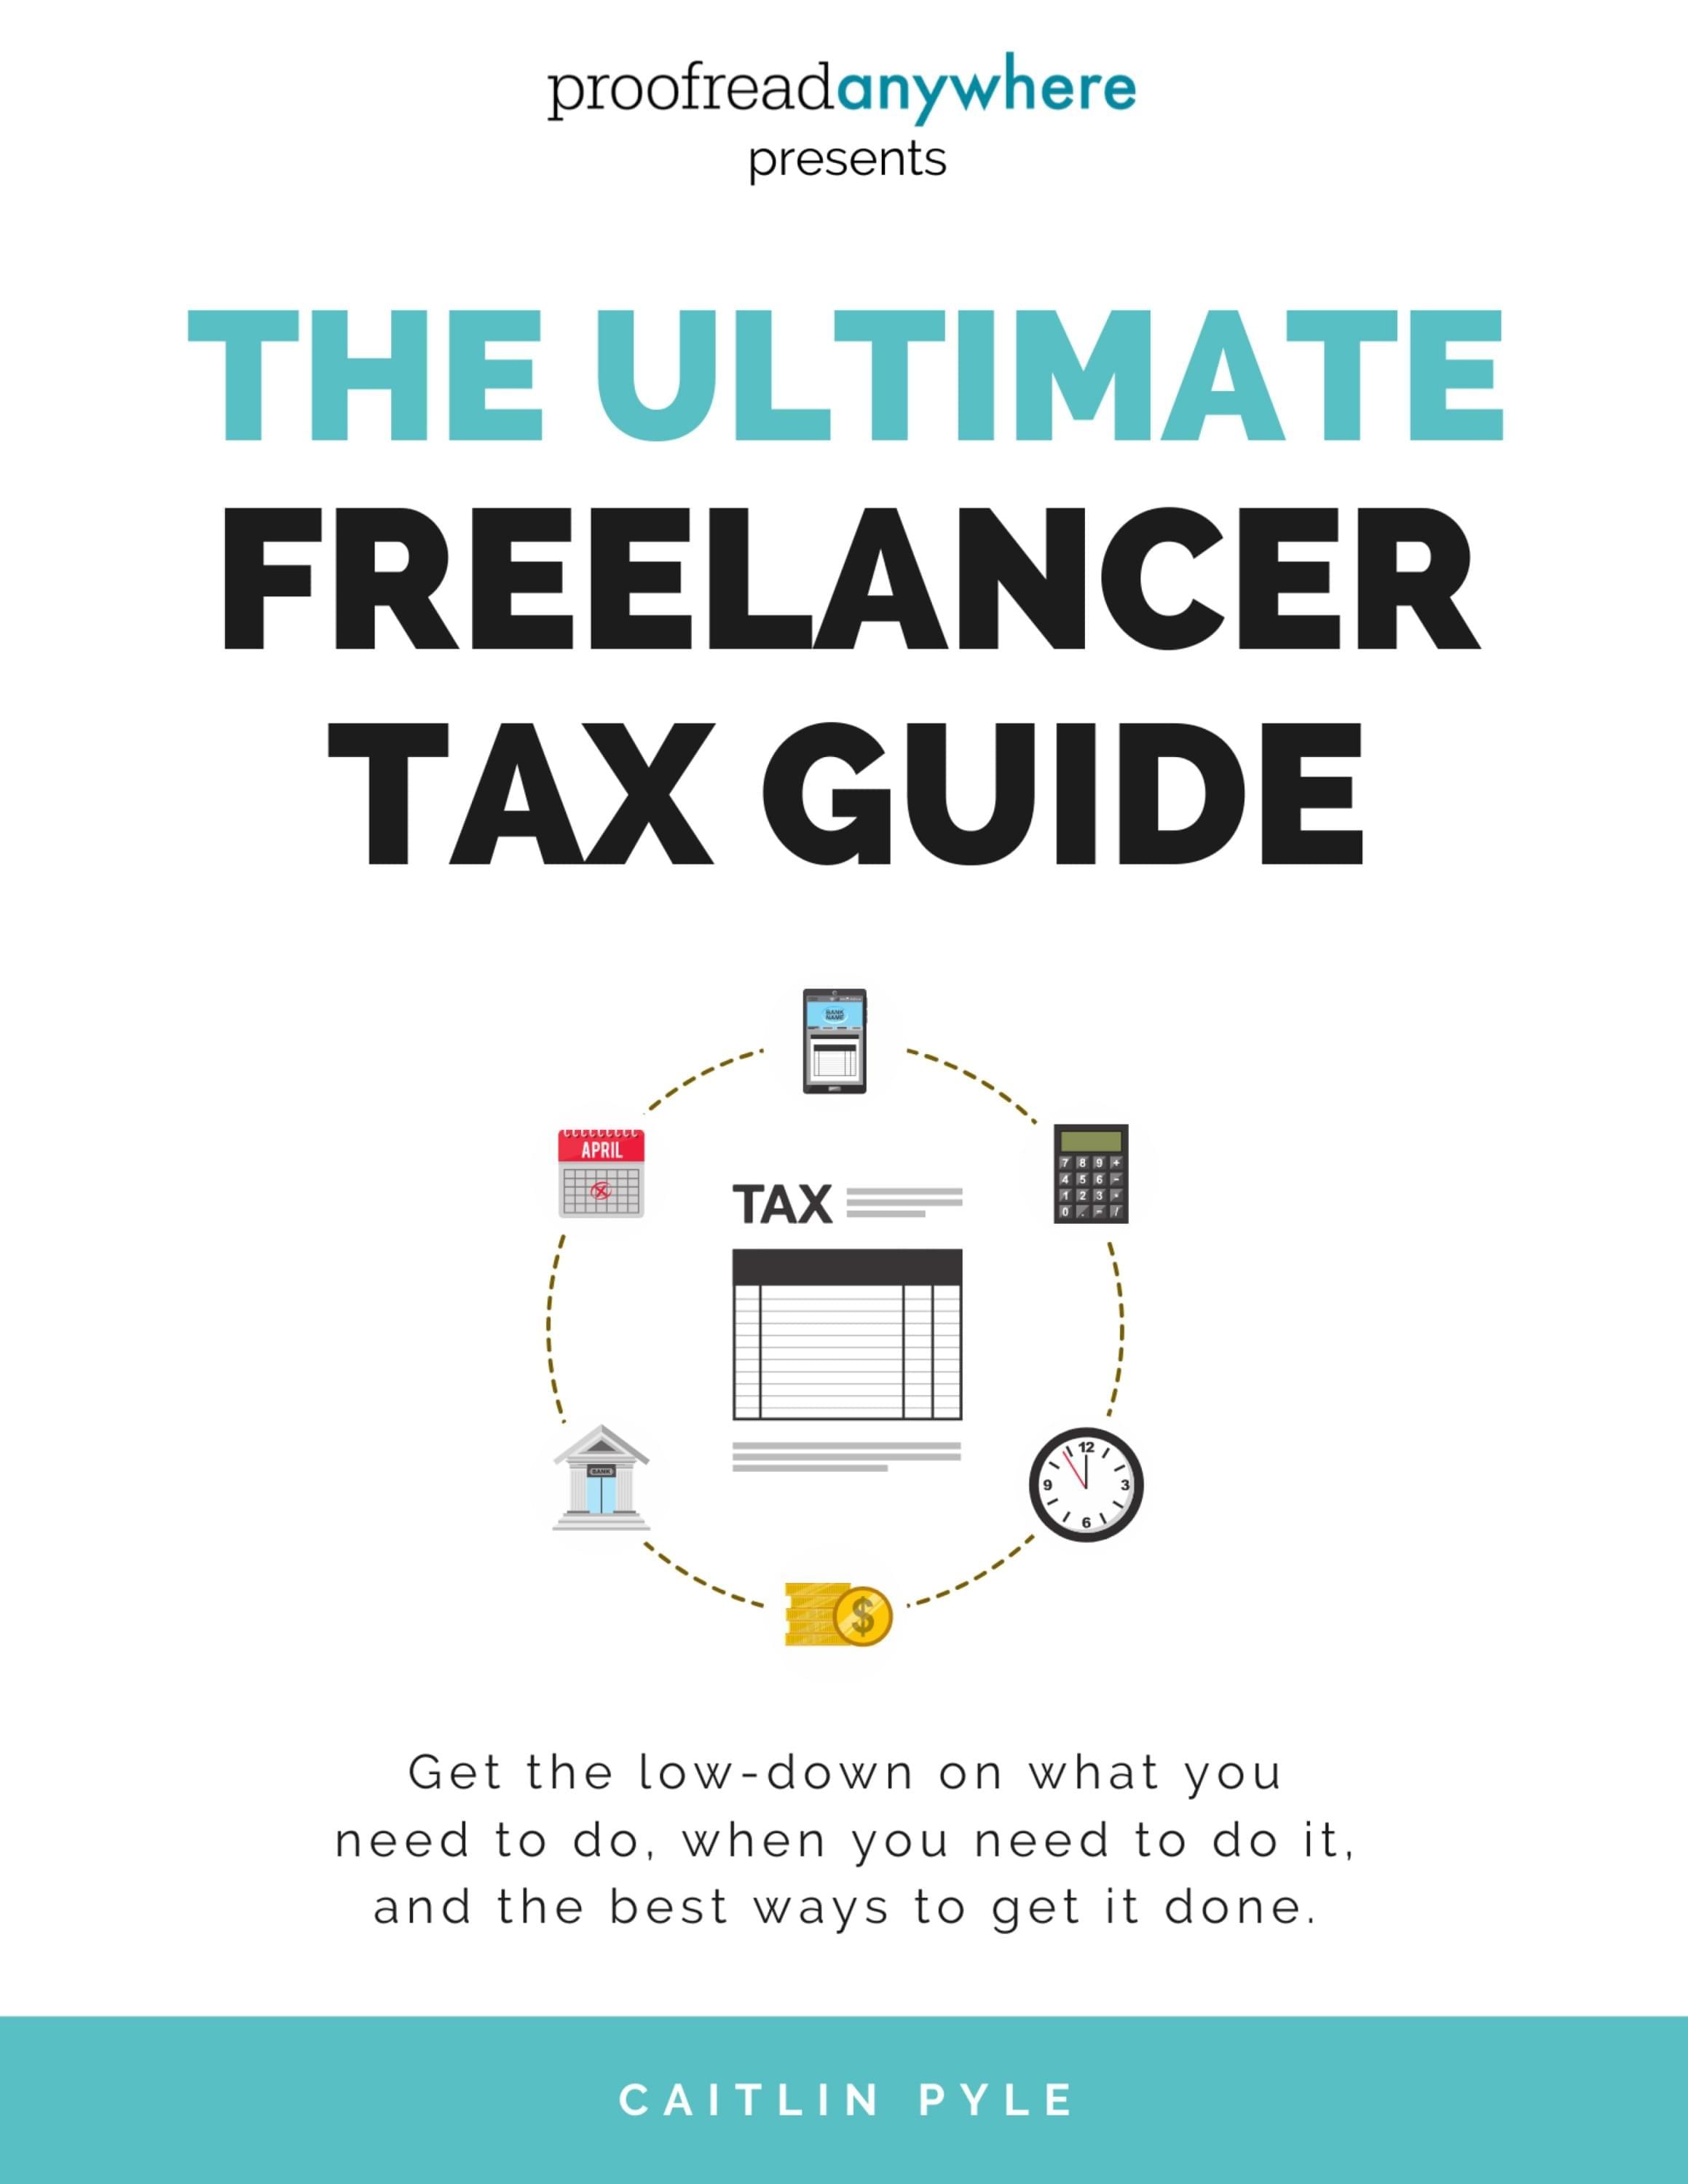 The ultimate freelancer tax guide